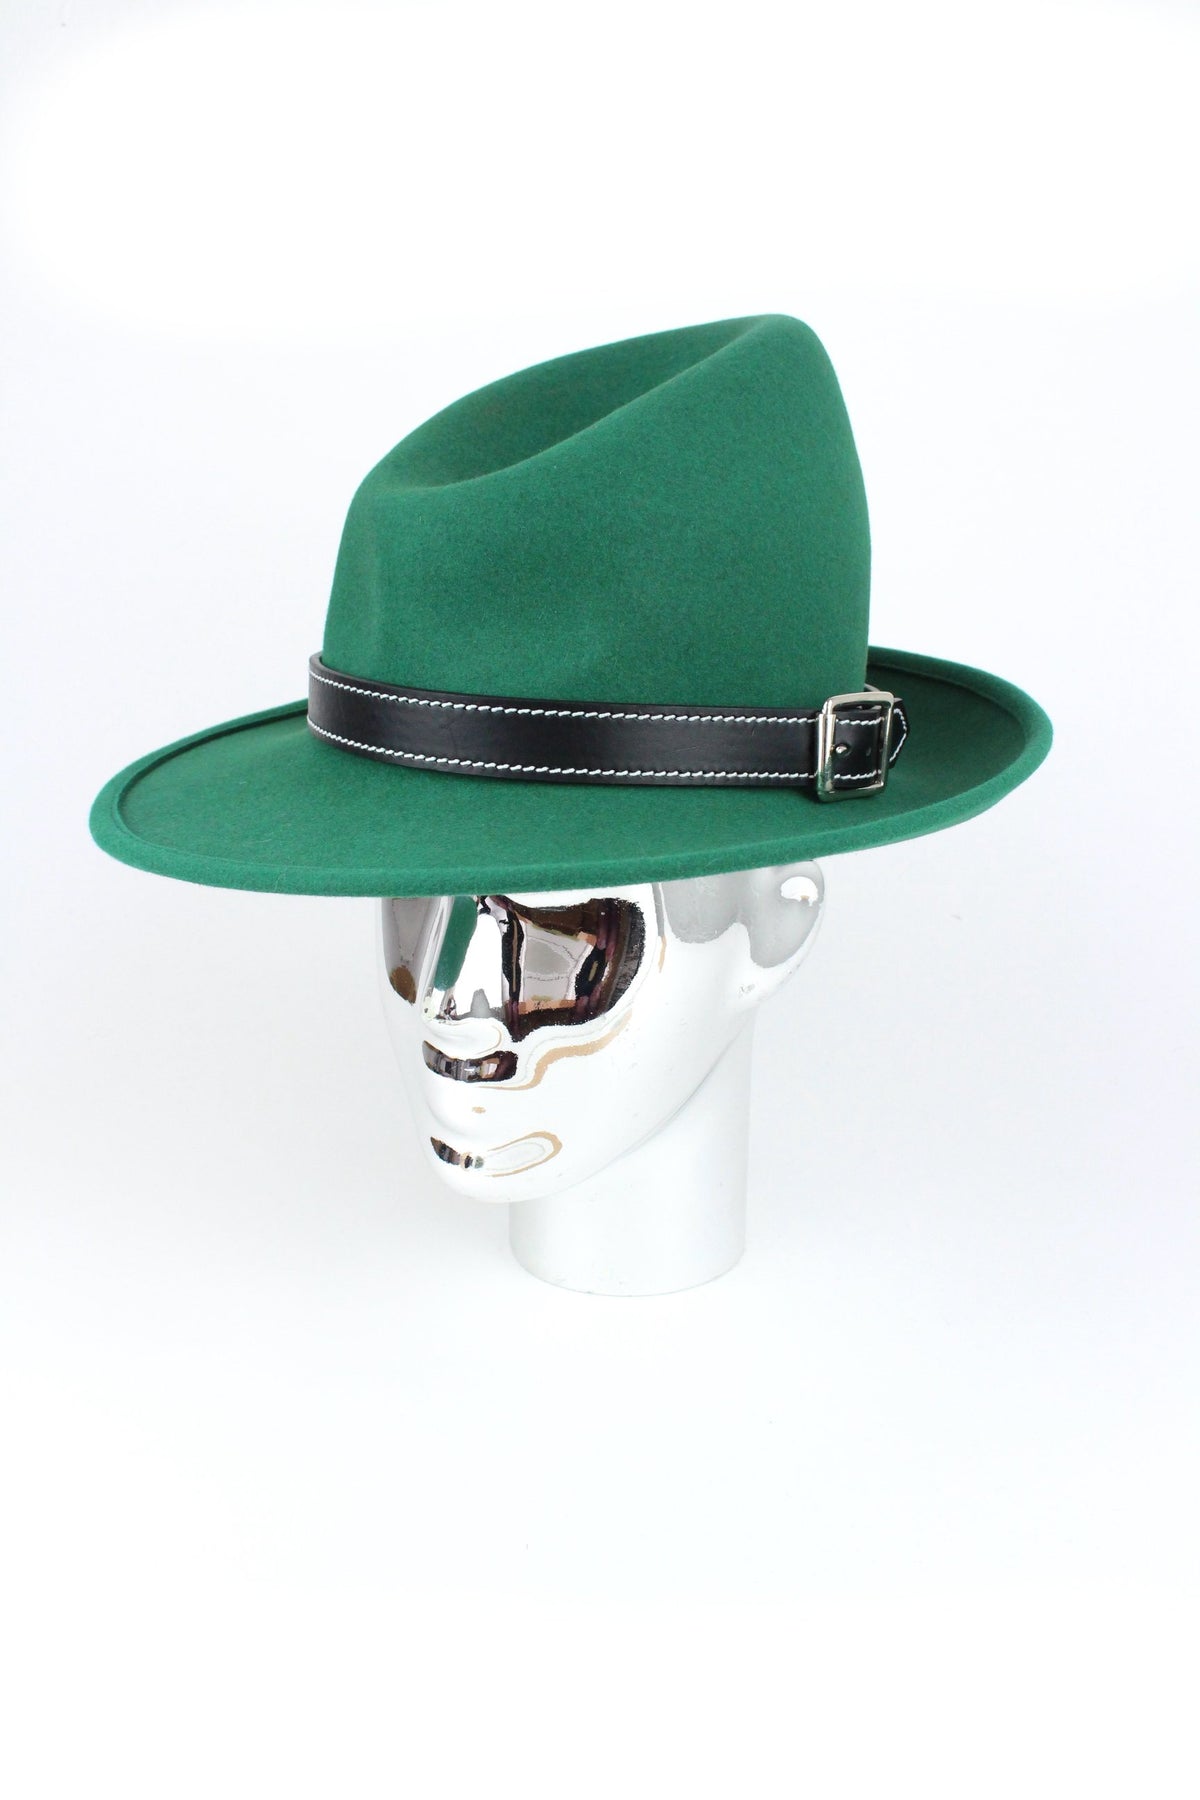 HIGHWAYMAN - EMERALD-hats-A Child Of The Jago